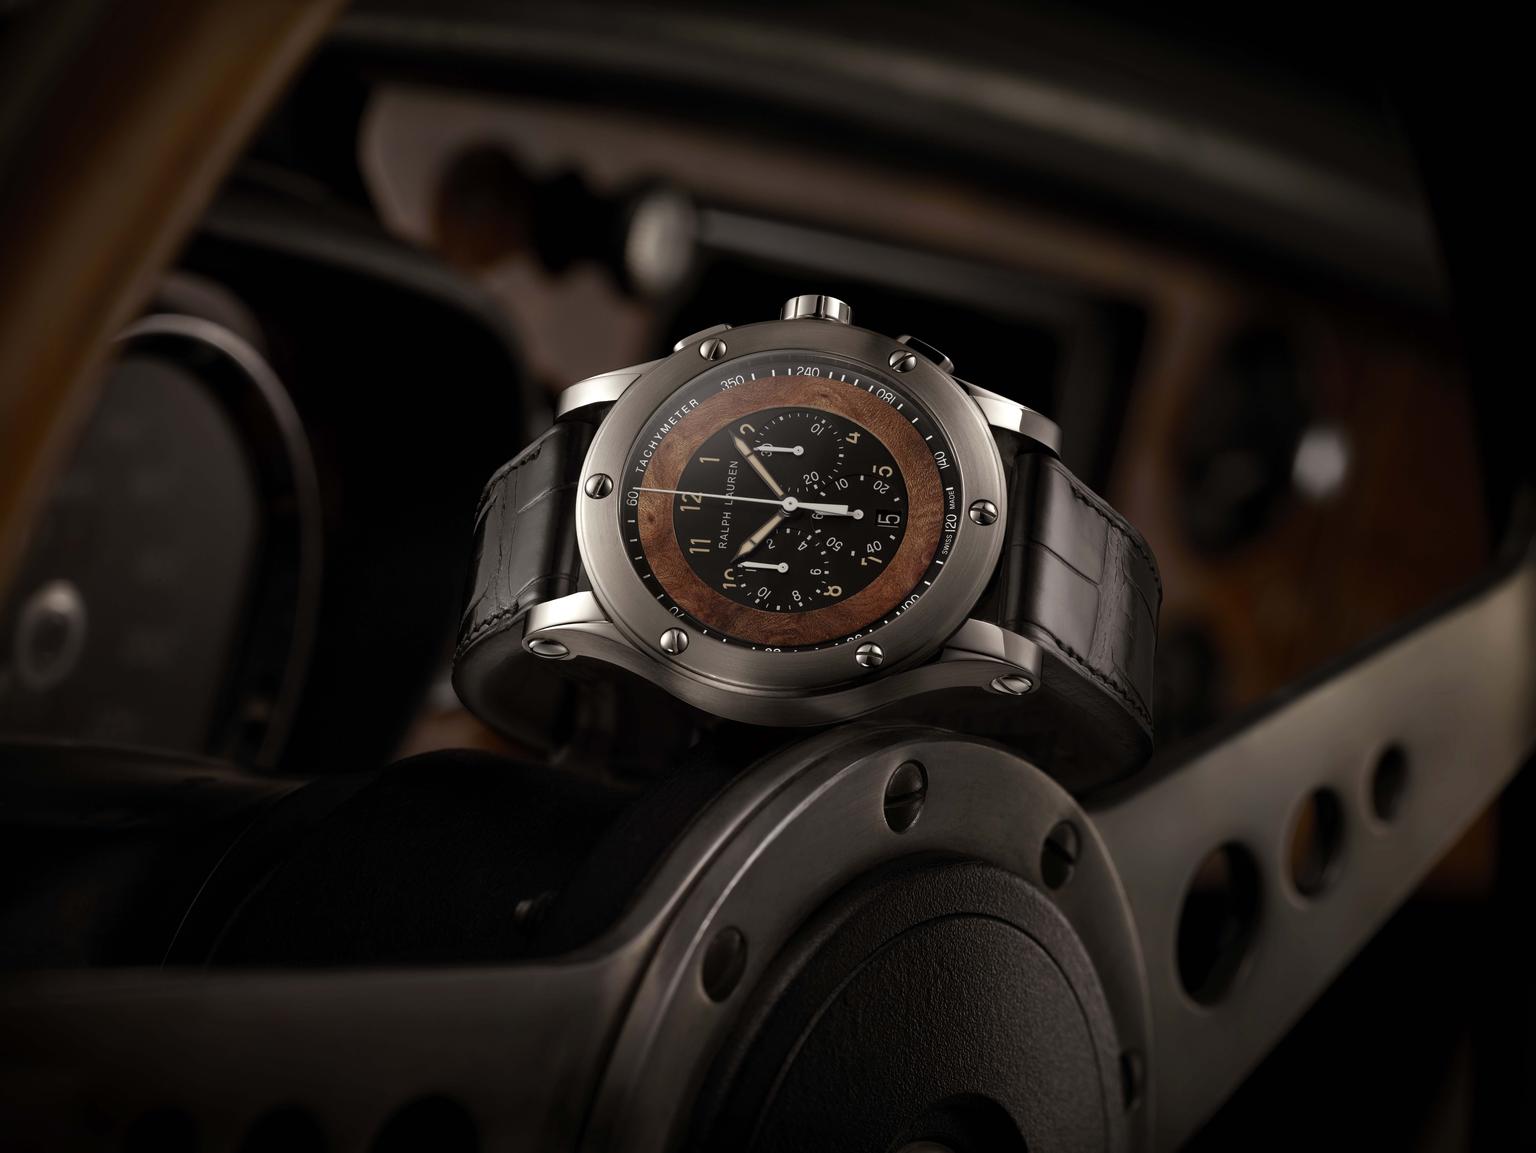 The sleek 45mm steel case of the Ralph Lauren Automotive Chronograph has been polished and brushed to a smooth matte finish and flaunts a sporty touch with the six exposed screws on the bezel. The screws replicate the original ones used on the hub that se